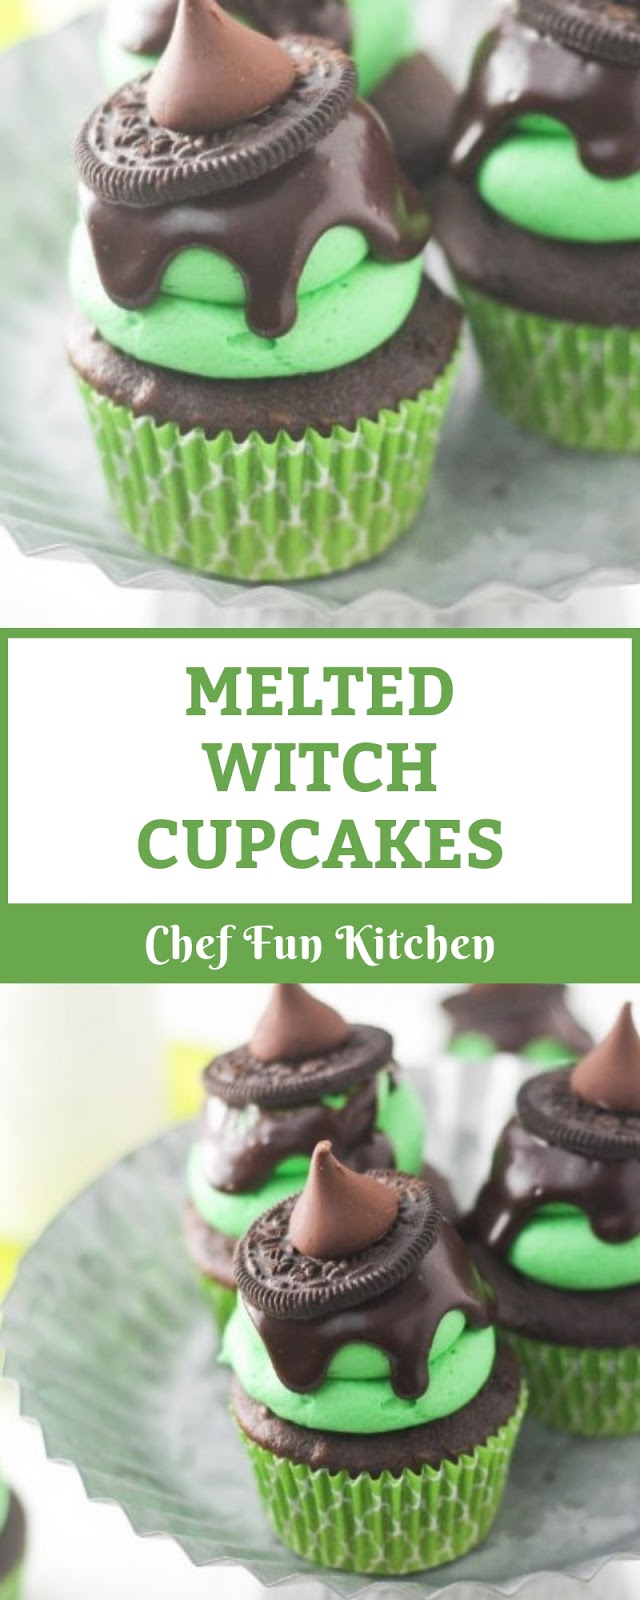 MELTED WITCH CUPCAKES